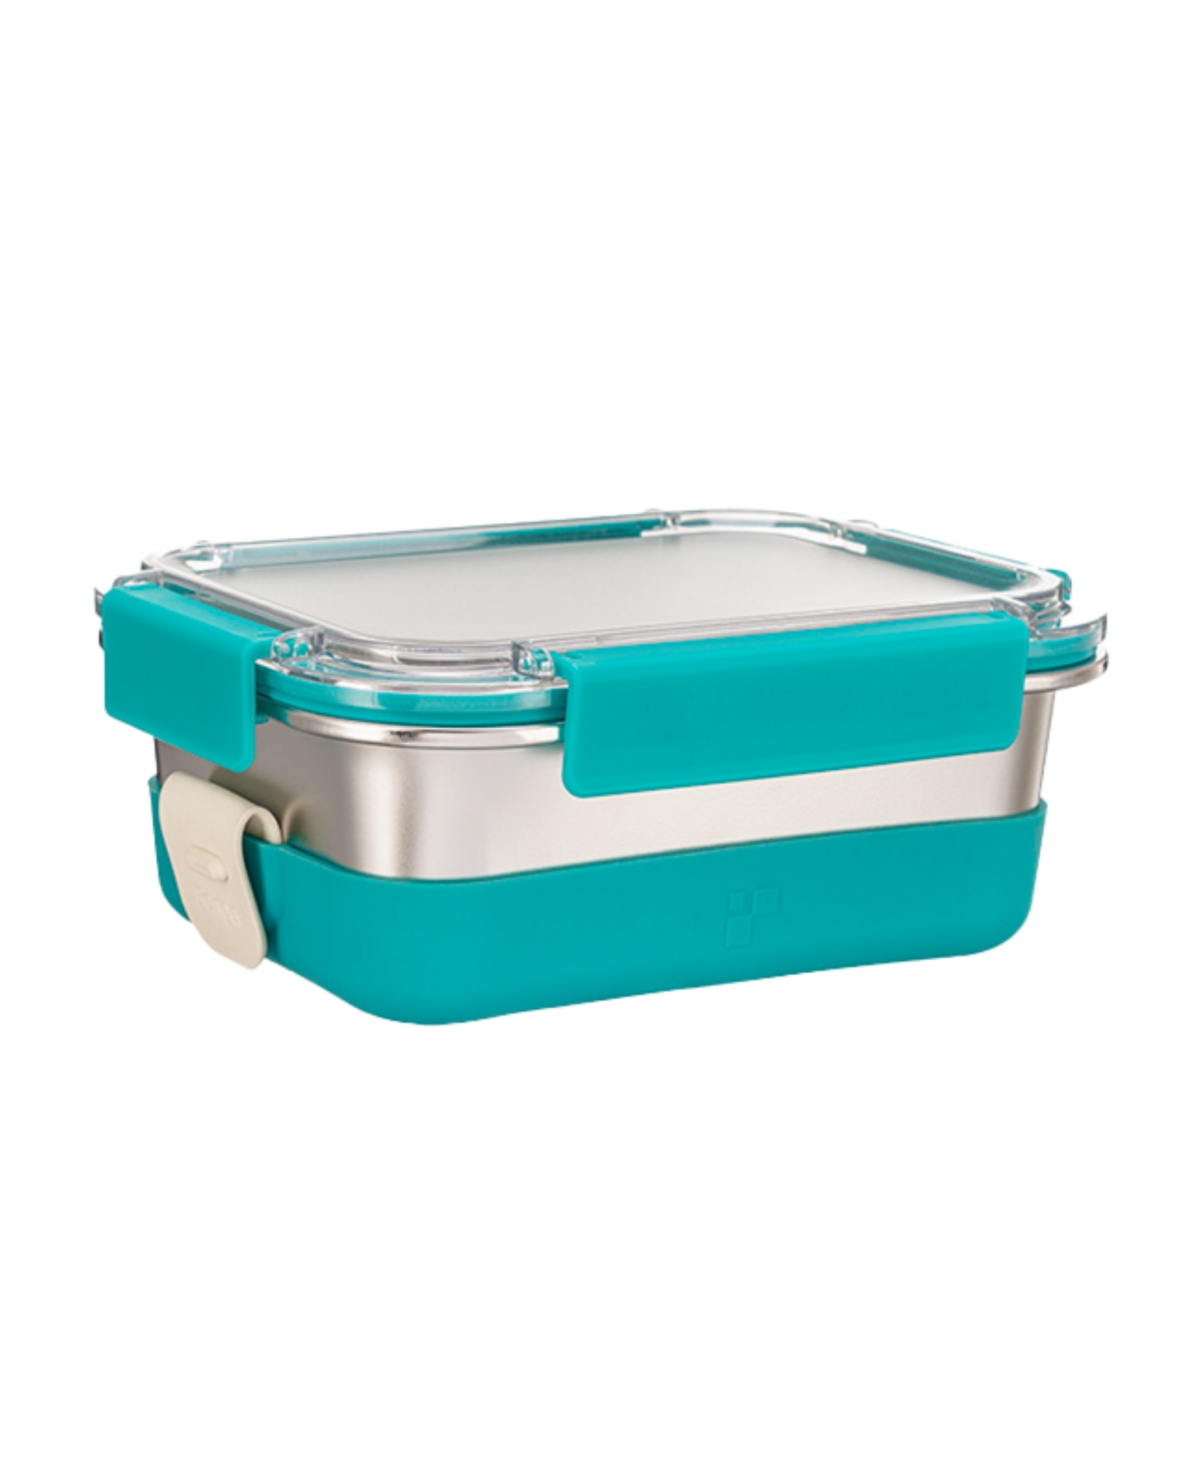 Fenger Stainless Steel Leak Resistant Container With Ms Lid And Silicone Sleeve In Teal